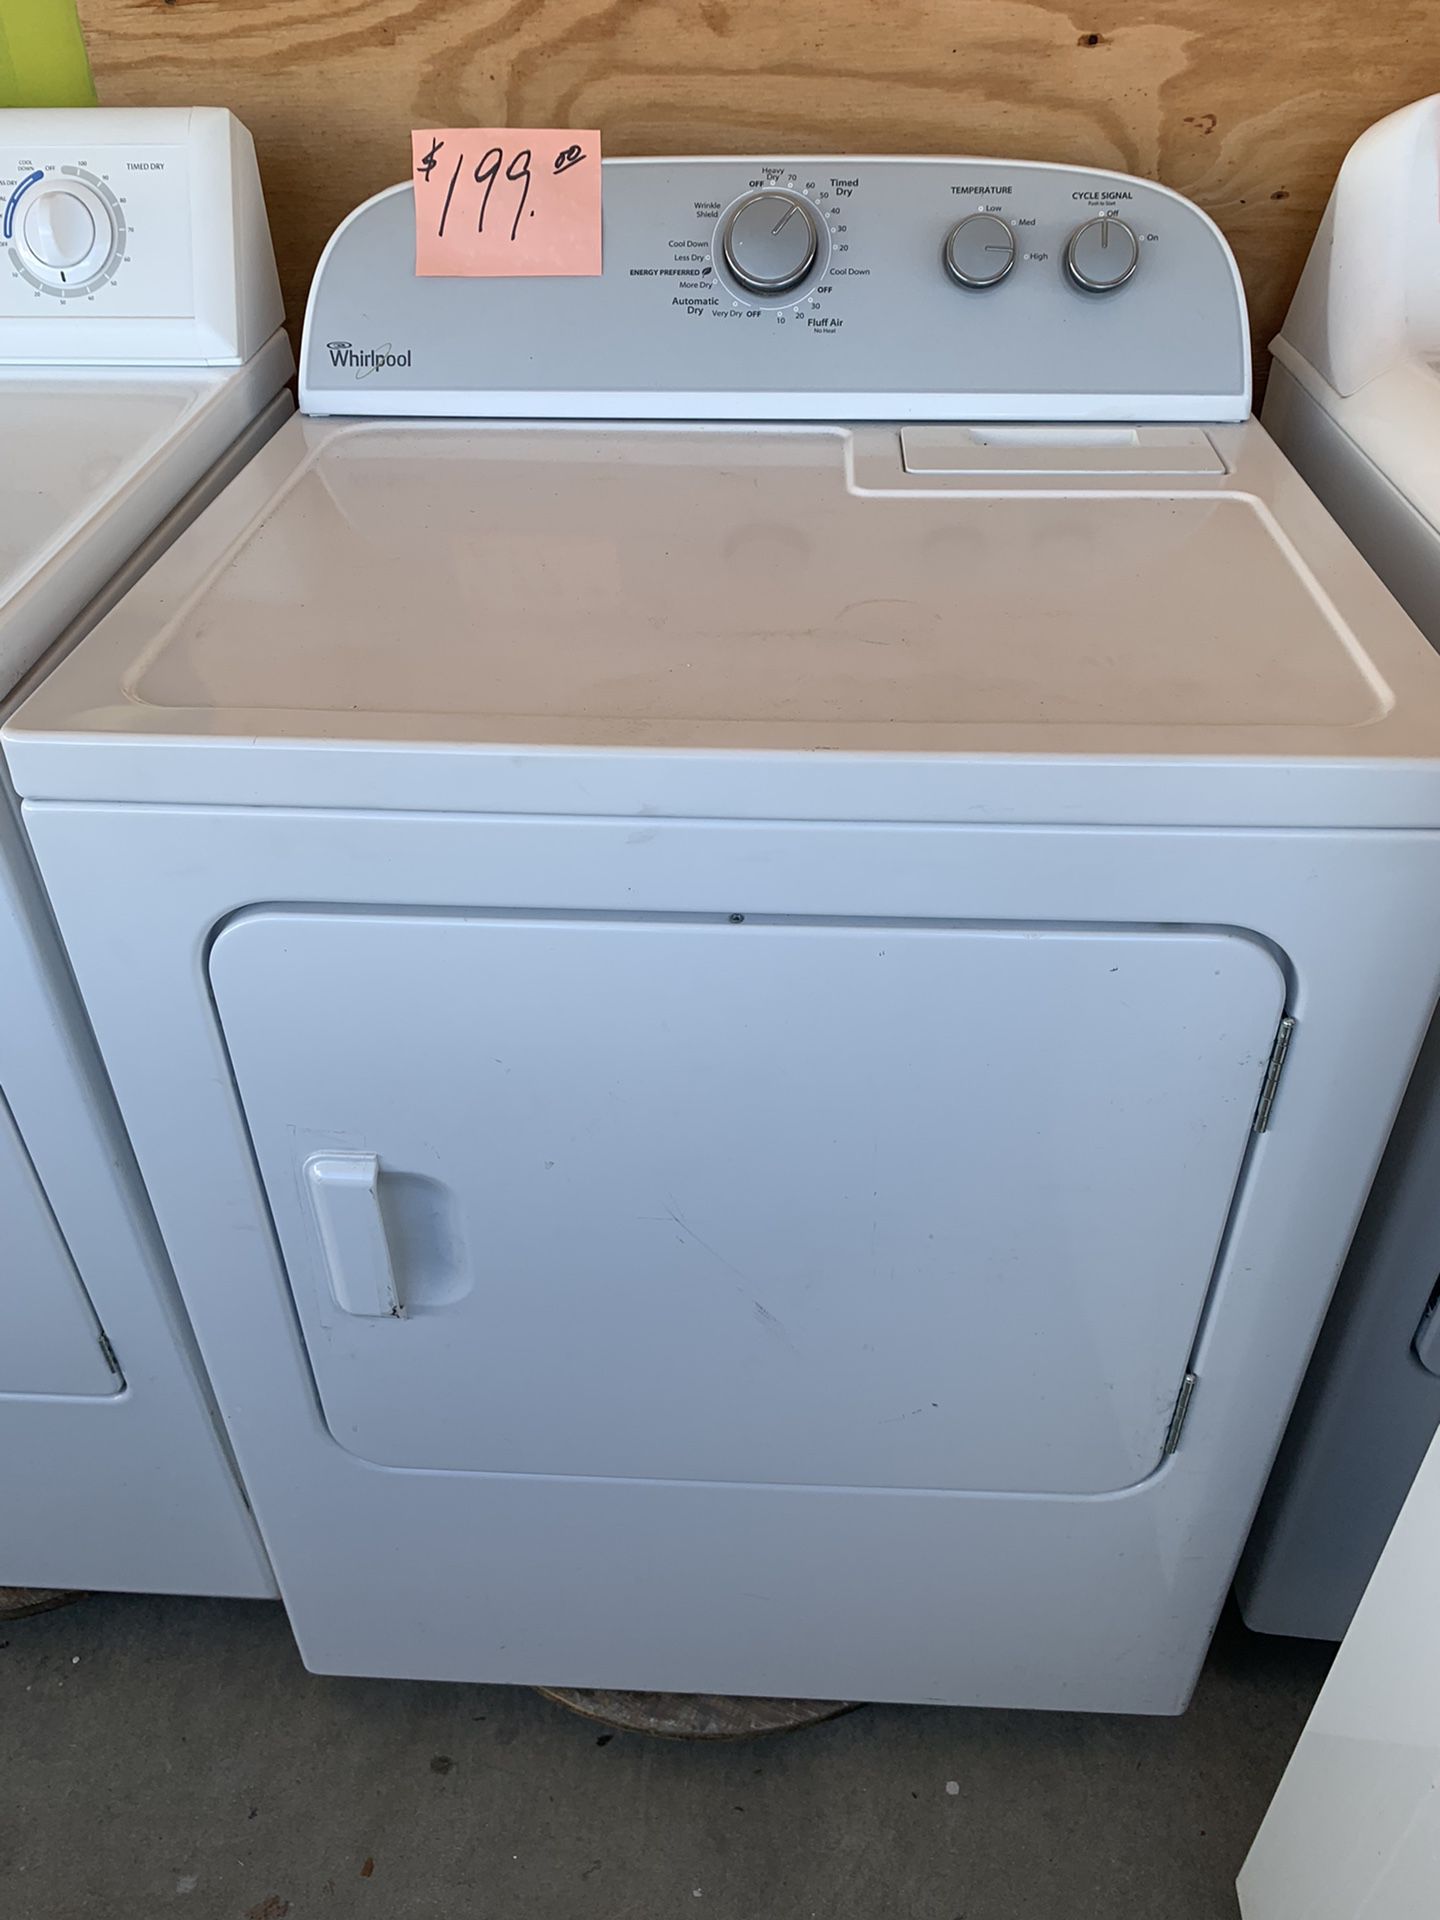 Whirlpool Dryer Super Size White Excellent  .  Warranty  . Delivery Available . 2203 Fowler St. 33901